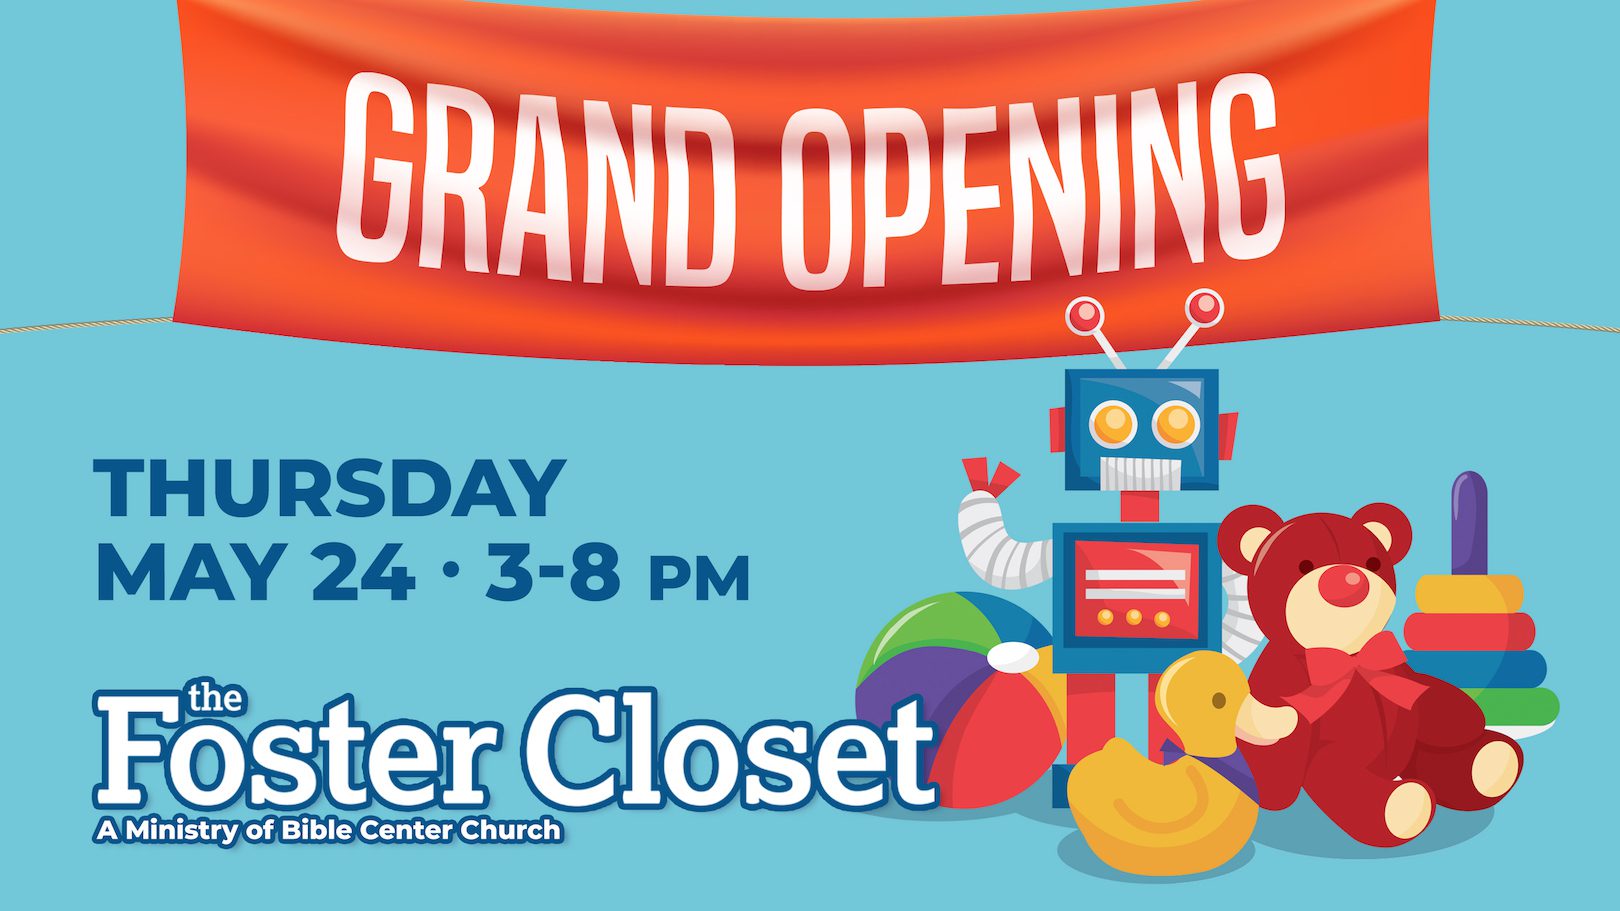 The Foster Closet – Grand Opening